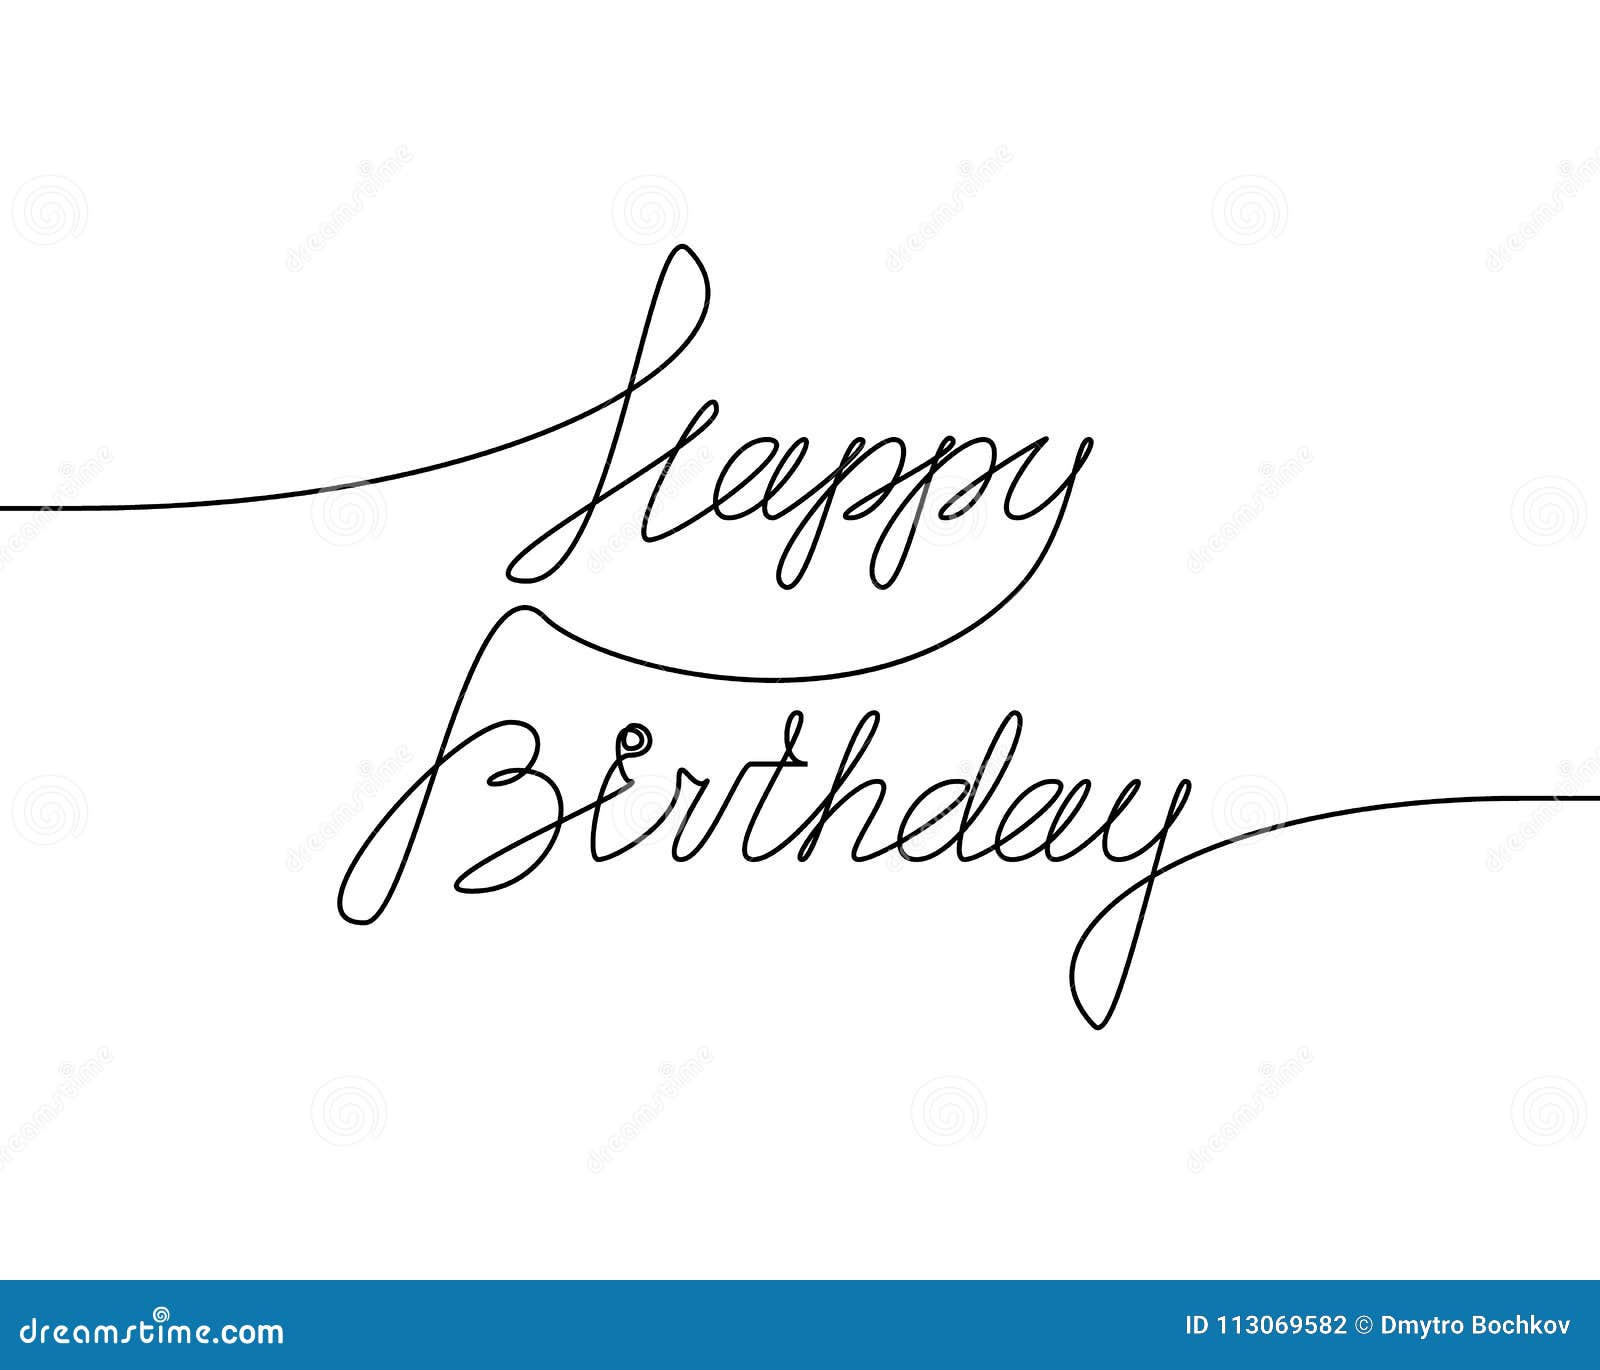 Happy Birthday Handwritten Inscription Hand Drawn Lettering Alligraphy One Line Drawing Of Phrase Vector Illustration Stock Illustration Illustration Of Graphic Card